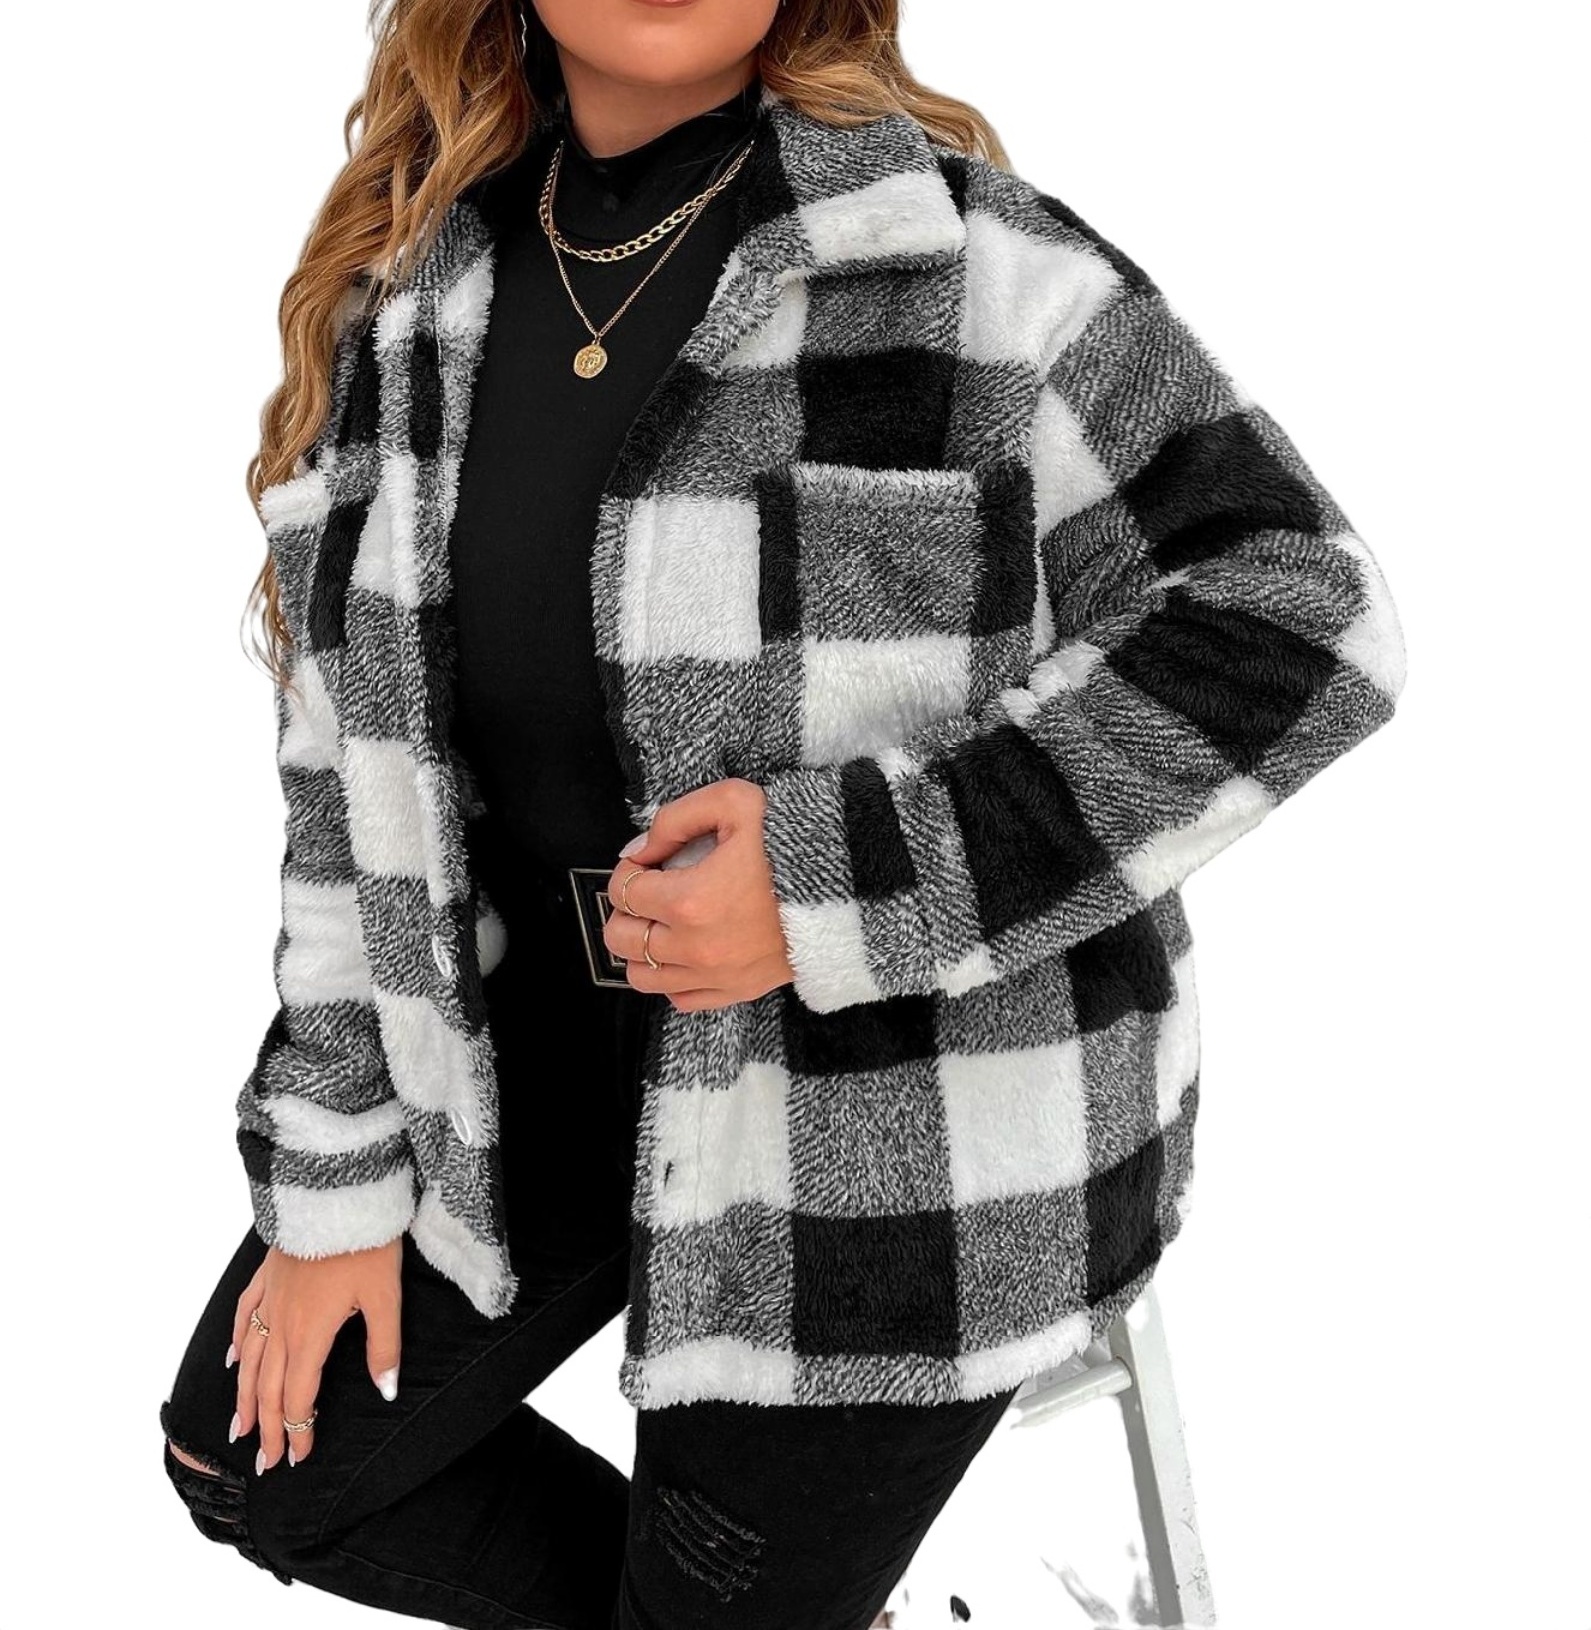 Casual Gingham Teddy Coat Black and White Plus Size Coats (Women's ...